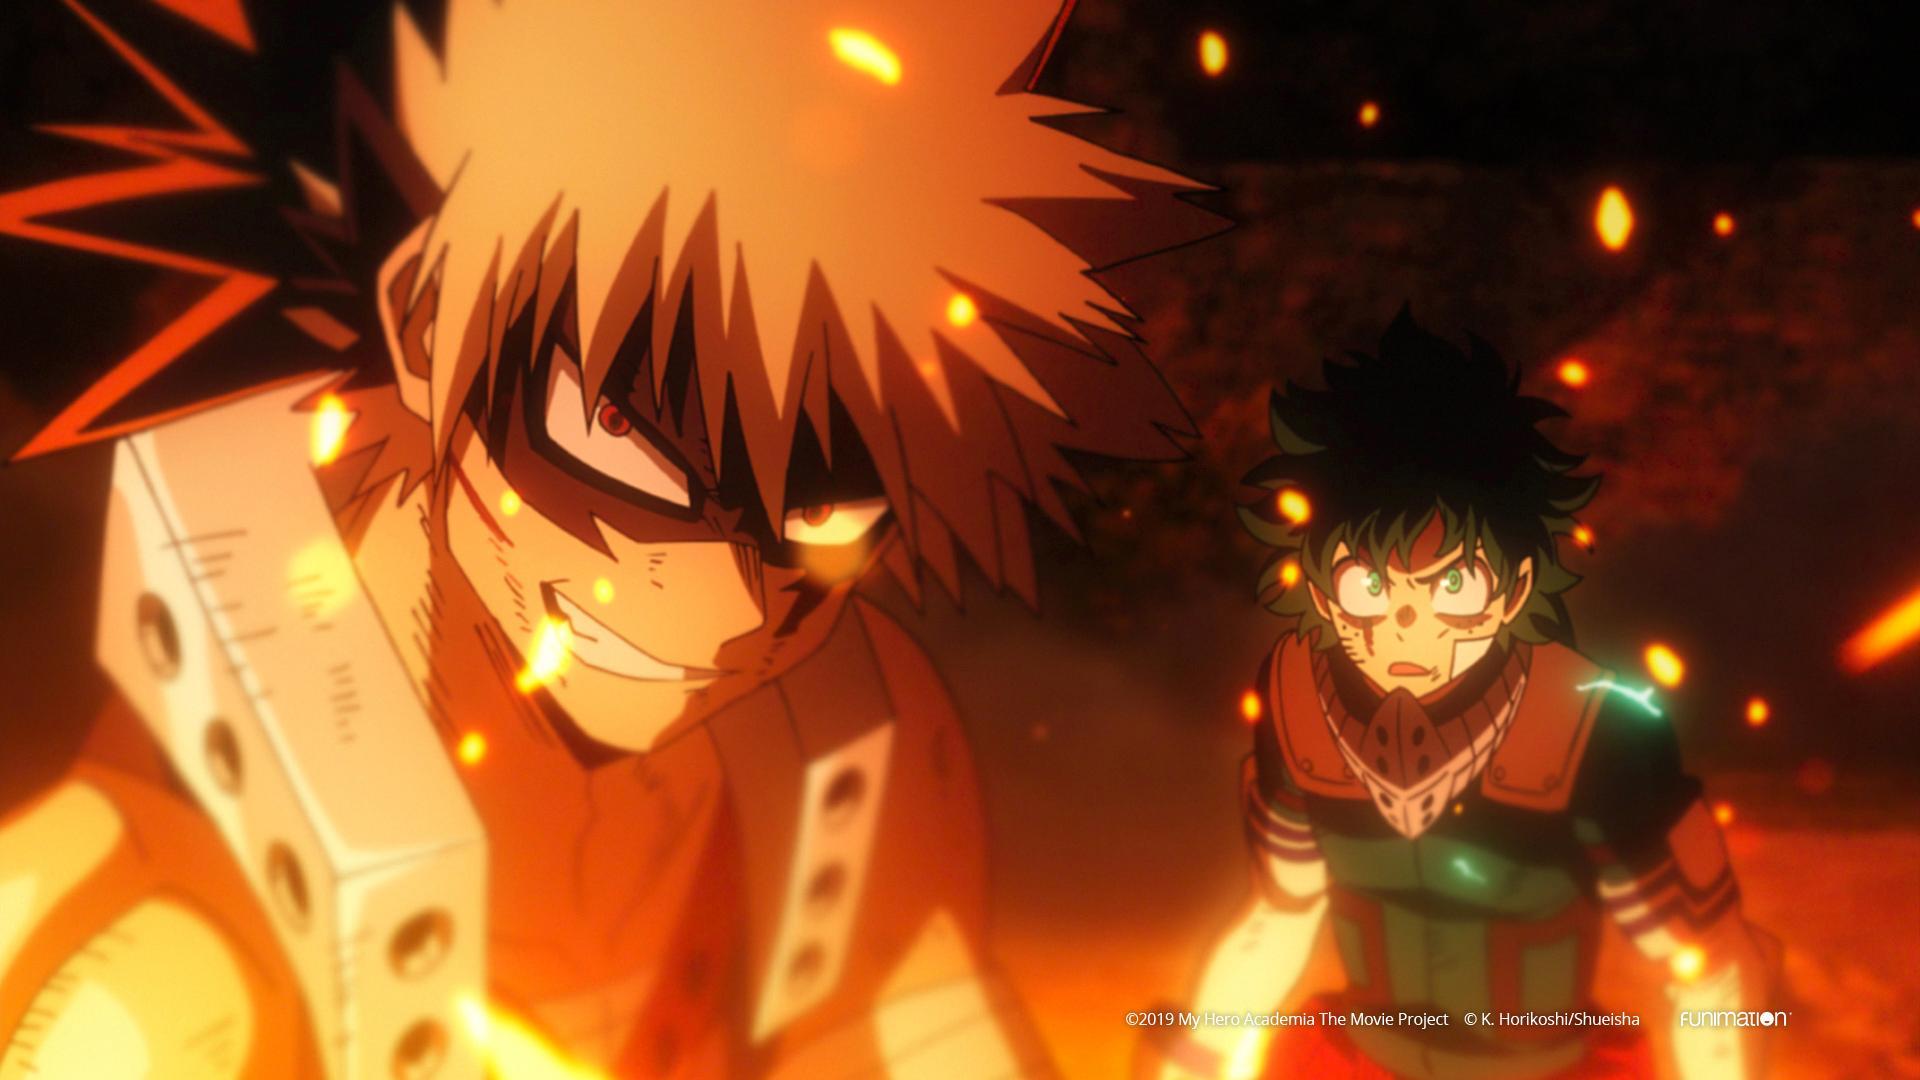 Twitter explodes as 'My Hero Academia' fans find out Bakugo's hero name